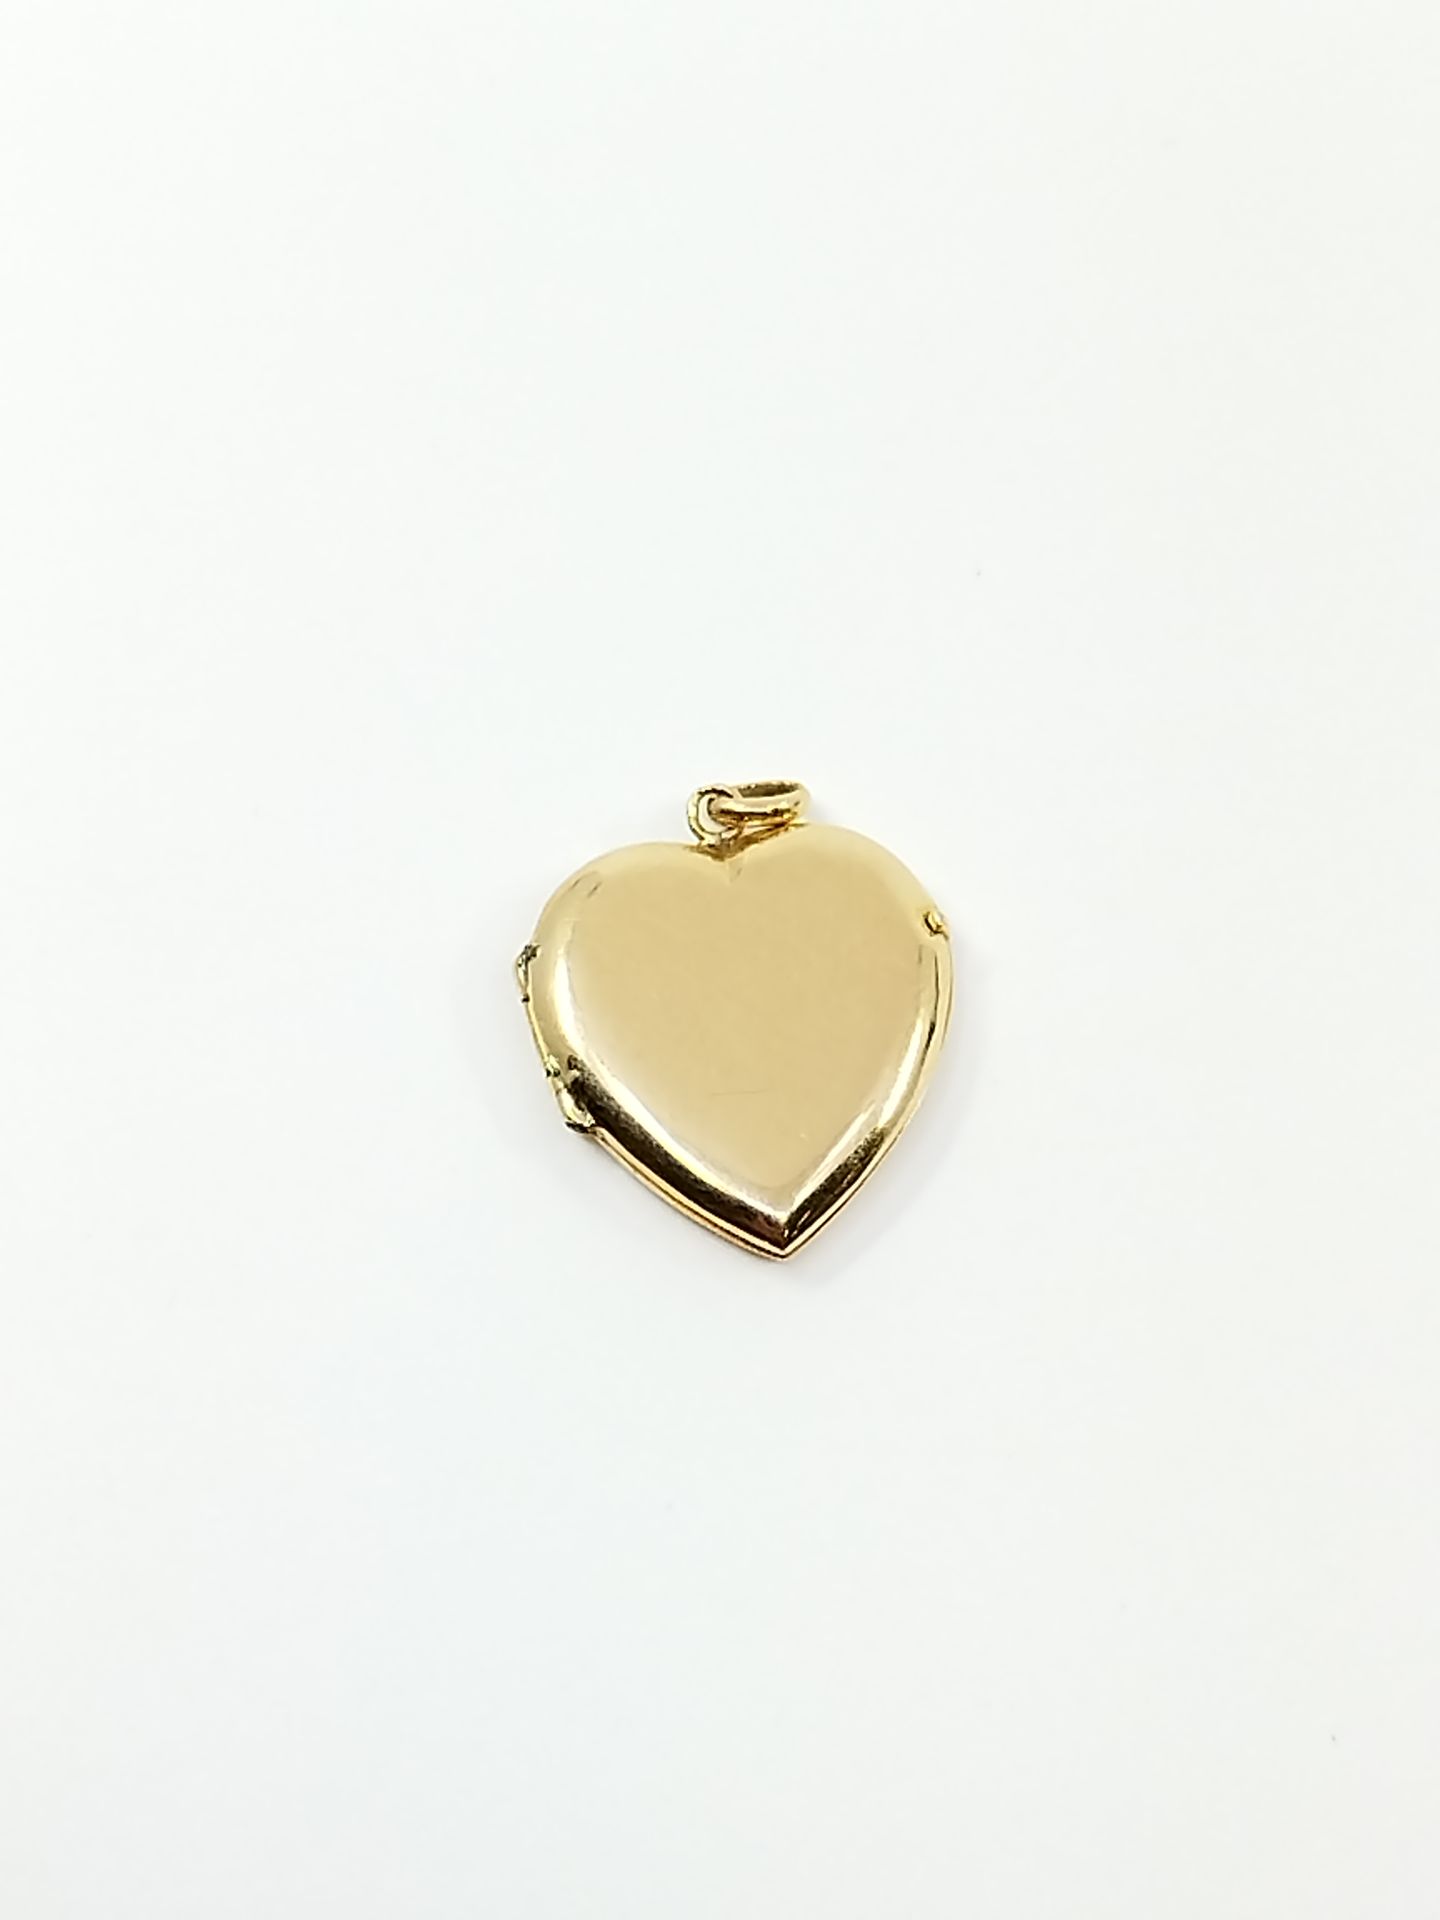 Null Heart-shaped pendant in yellow gold 750

Gross weight : 2,76 g